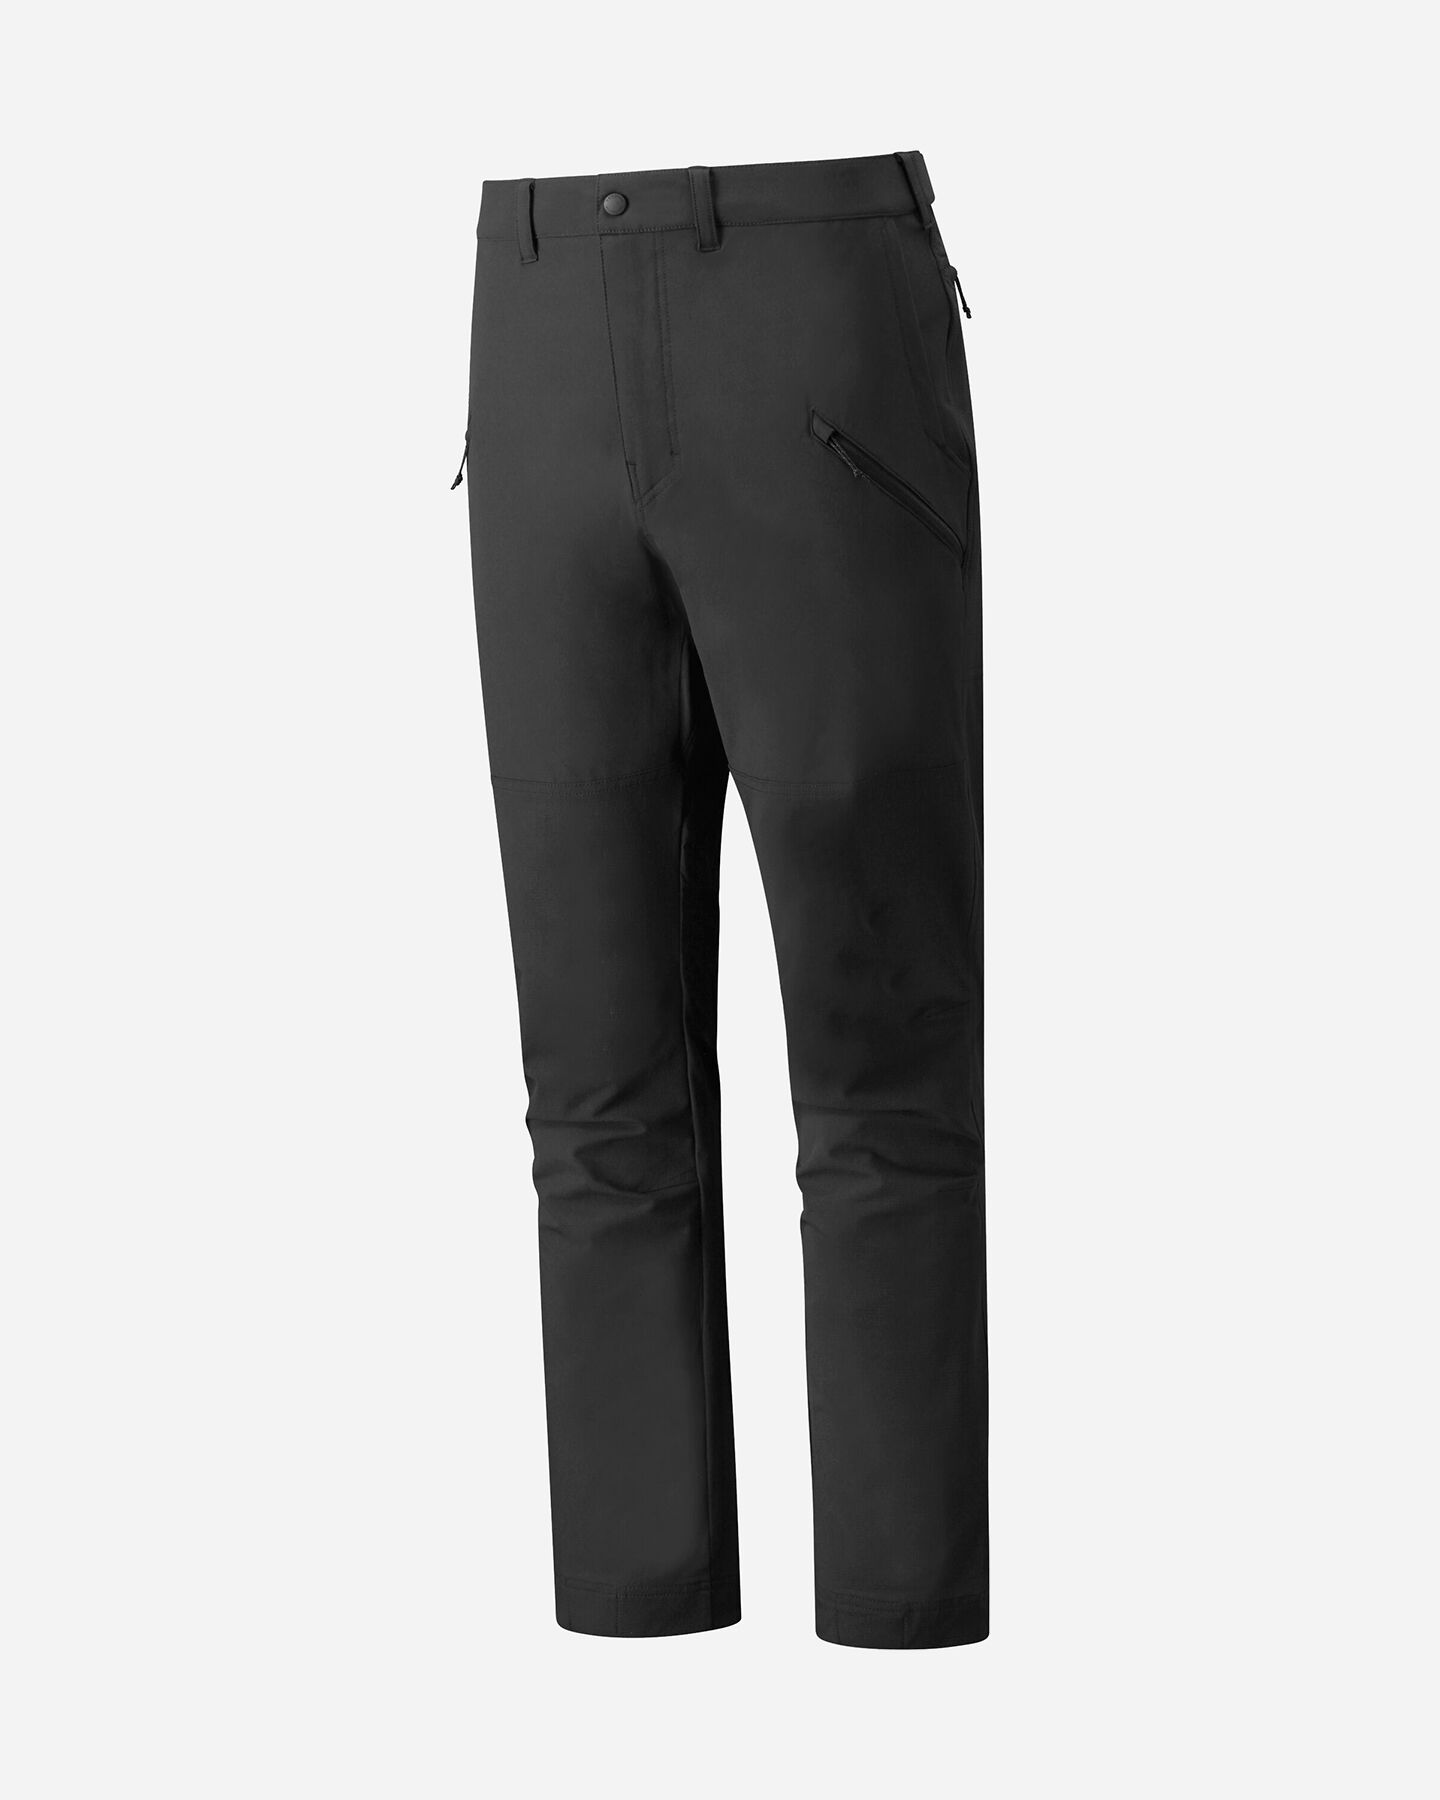  Pantalone outdoor PATAGONIA POINT PEAK TRAIL M S4097087|BLK|30 scatto 5